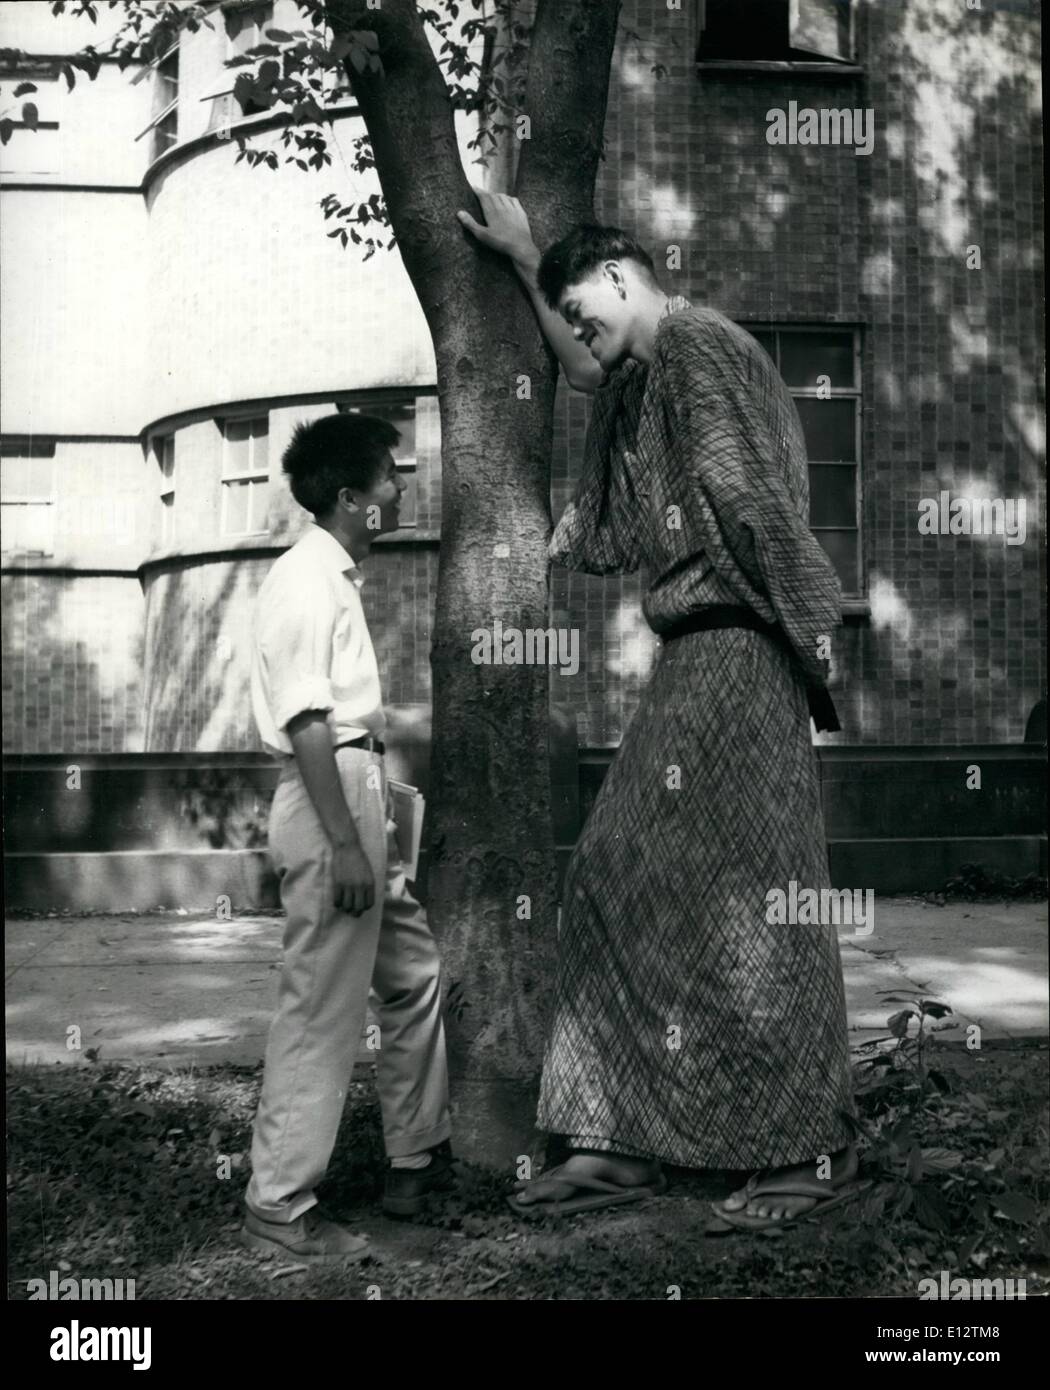 Feb. 24, 2012 - The giant Yoshimitsu talks with a normal size Japanese man in the grounds of the hospital. Stock Photo